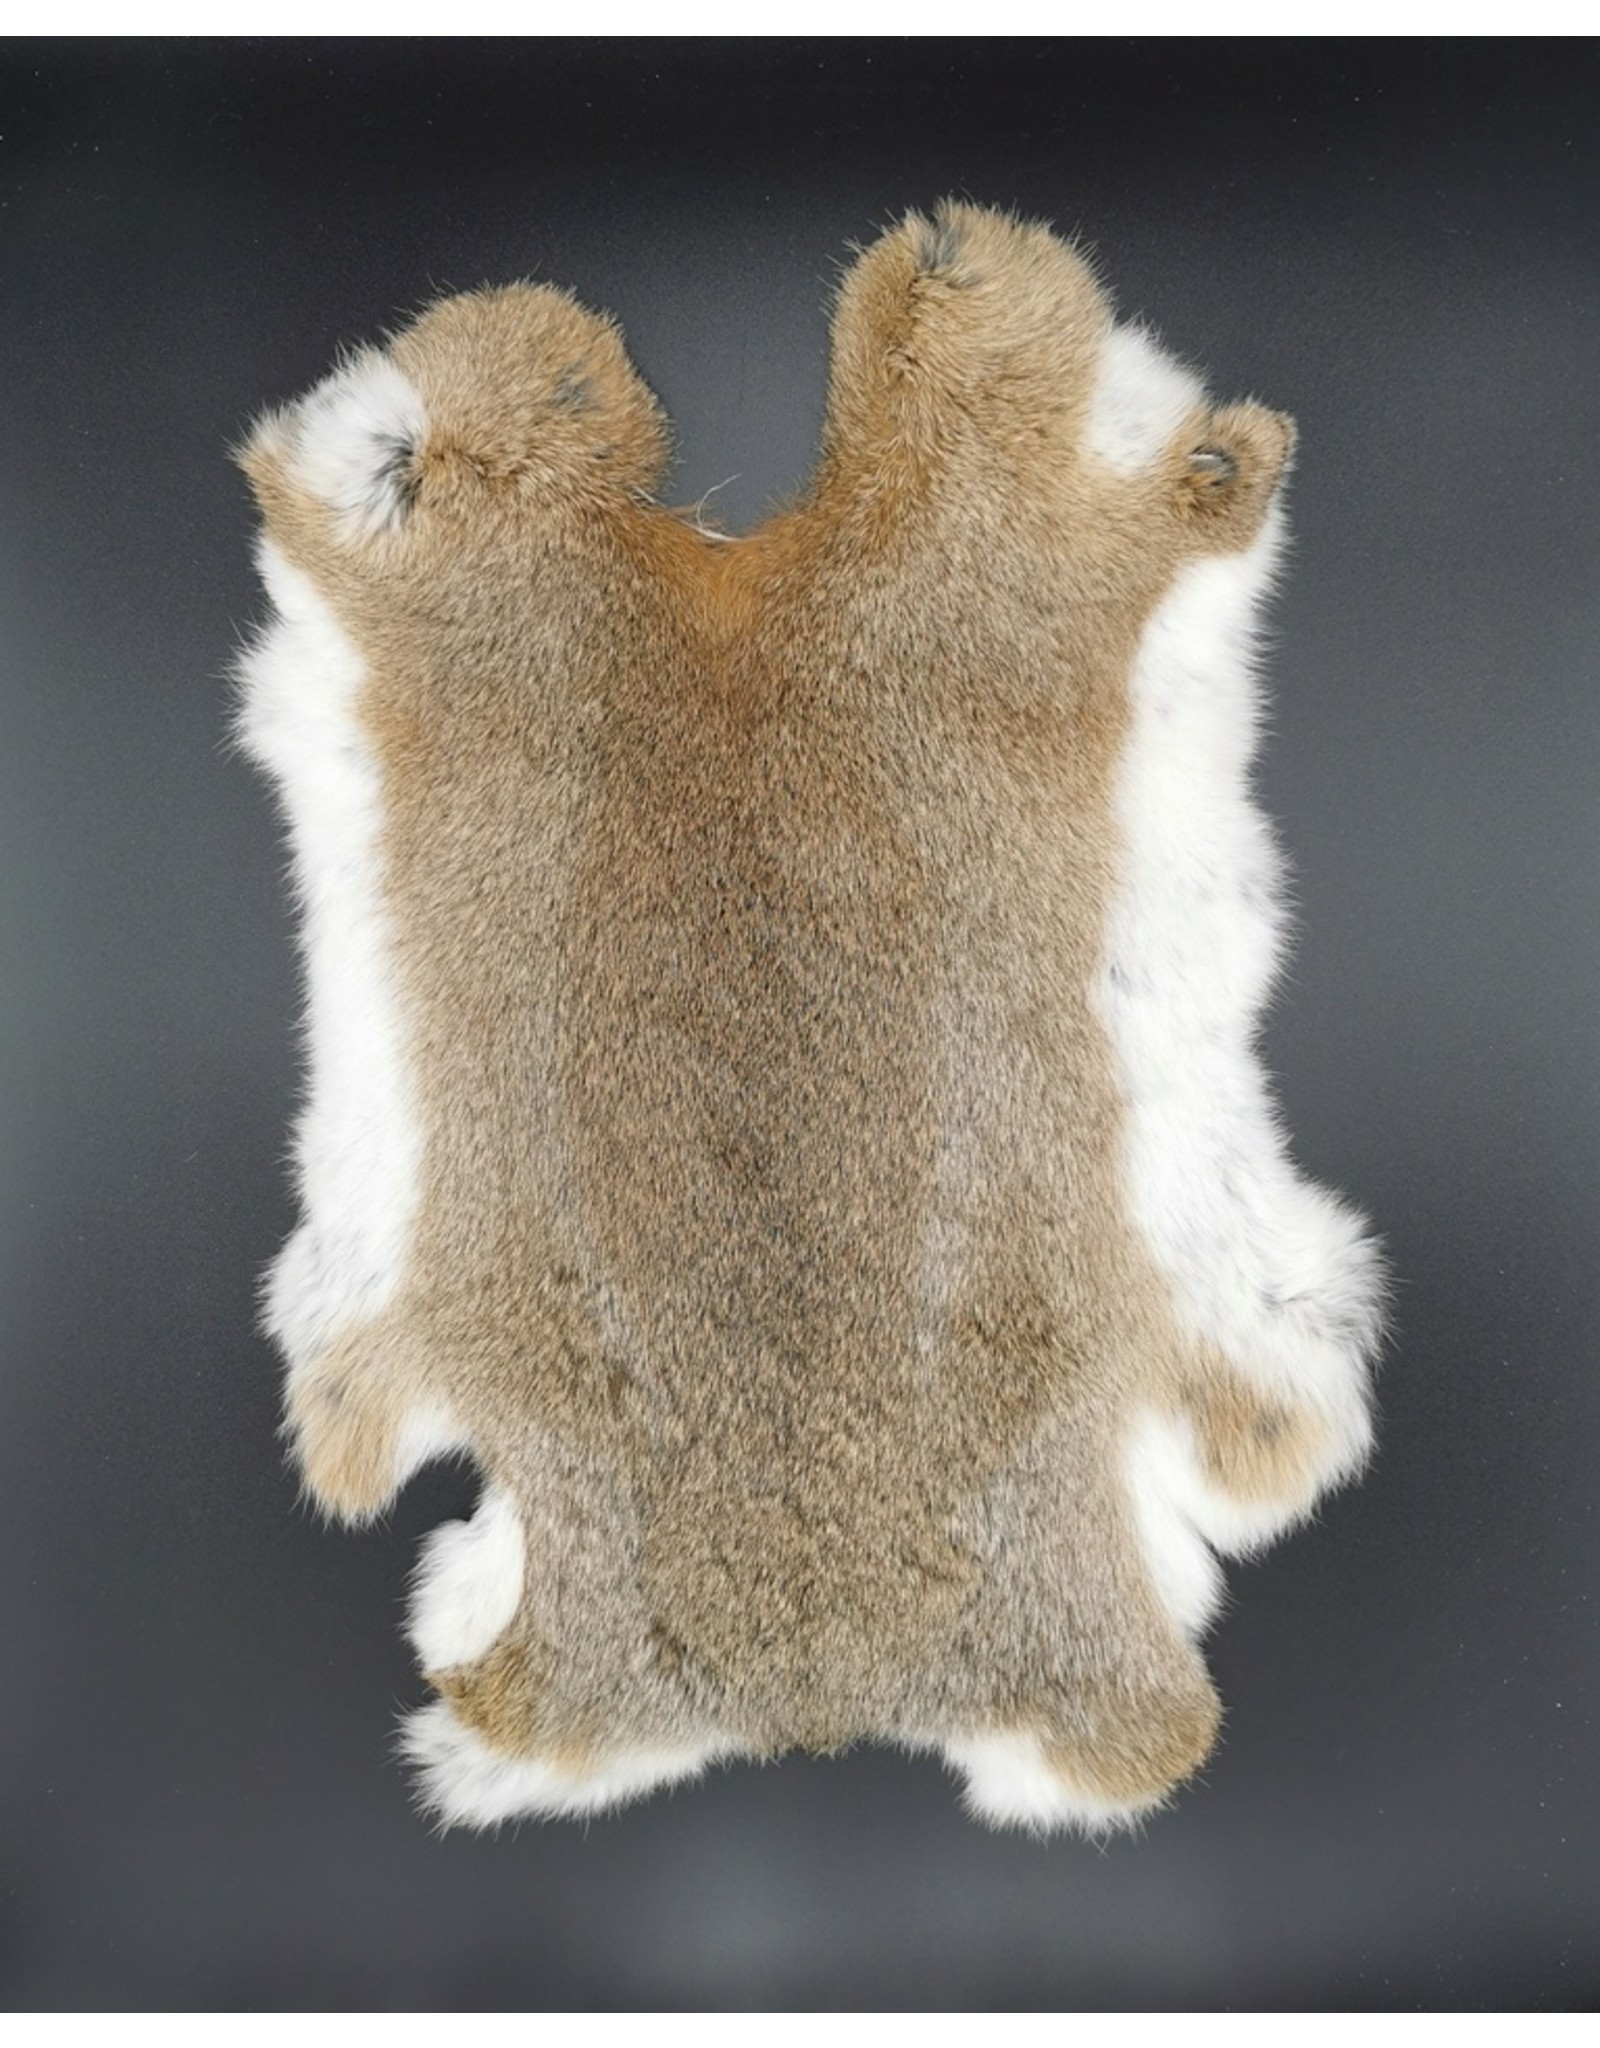 Mars&More Miscellaneous - Rabbit fur brown 30cm x 40cm (soft and odorless)